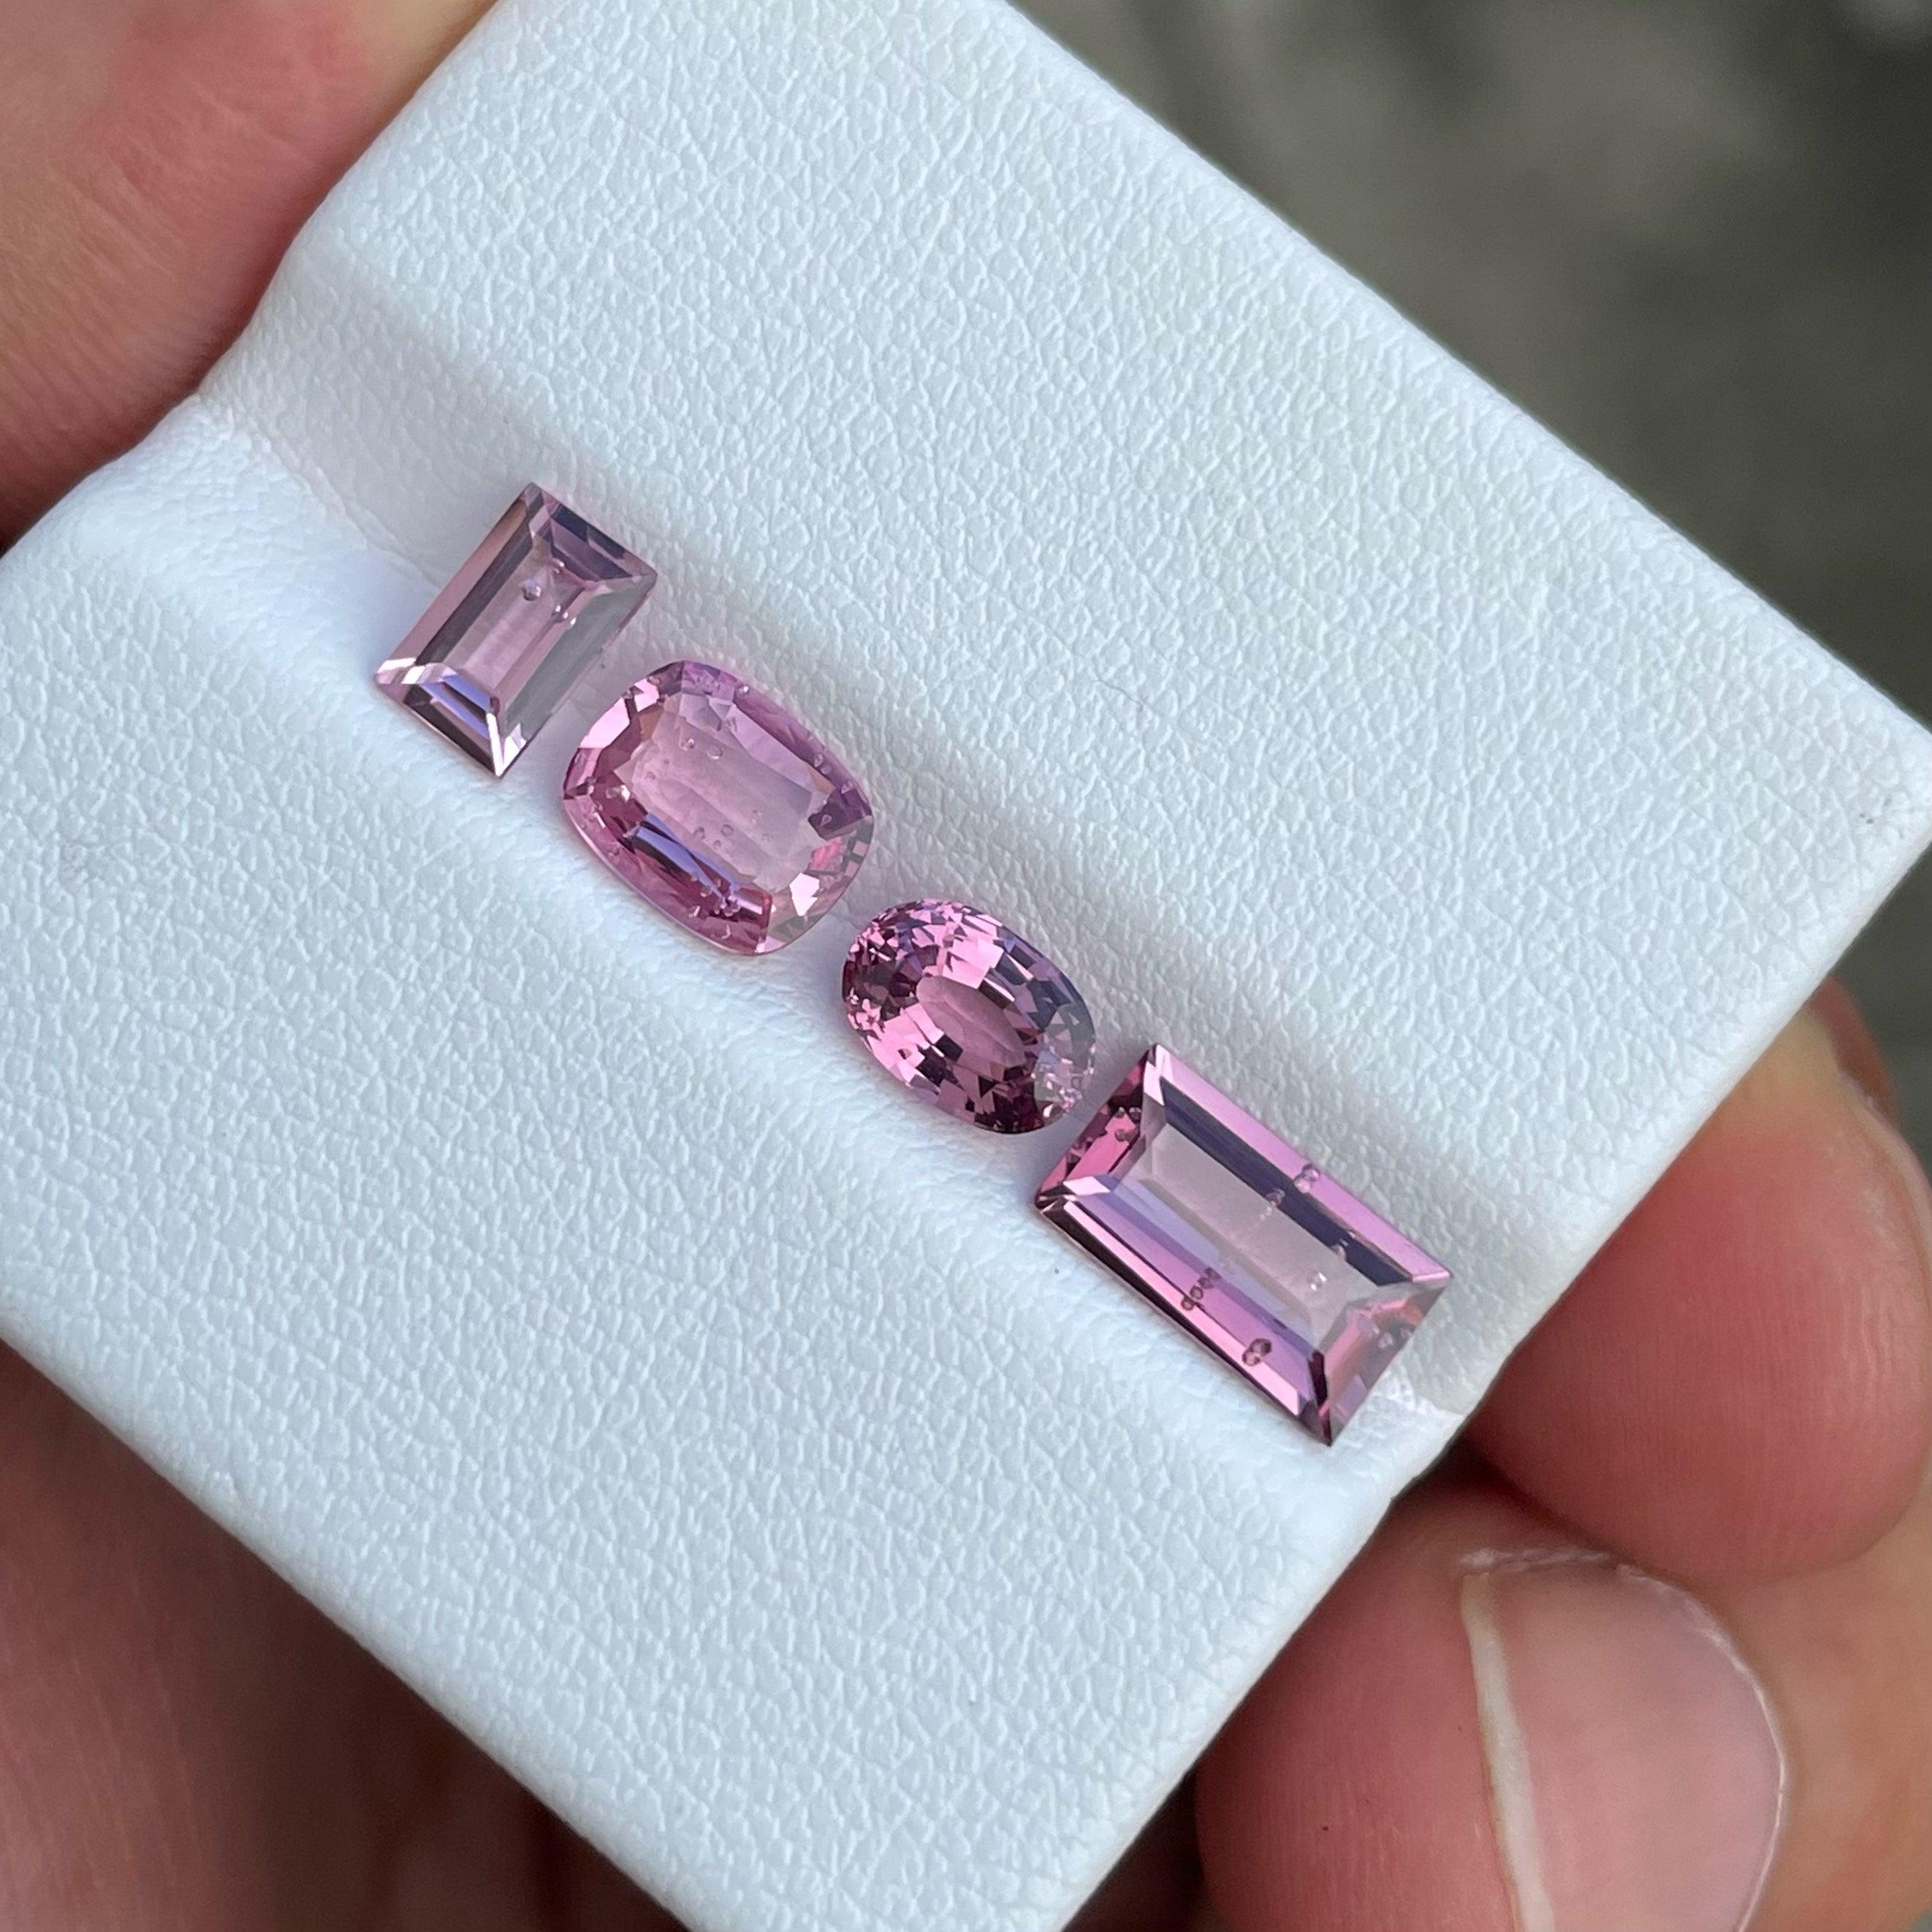 Pink Spinel Gemstone lot, available for sale at wholesale price natural high quality pink spinel gemstone 4.50 carats-Each weight 1.60, 1.15, 1.05 and 0.70 carats From Burma.

Product Information:
GEMSTONE TYPE:	Pink Spinel Gemstone lot
WEIGHT:	4.50